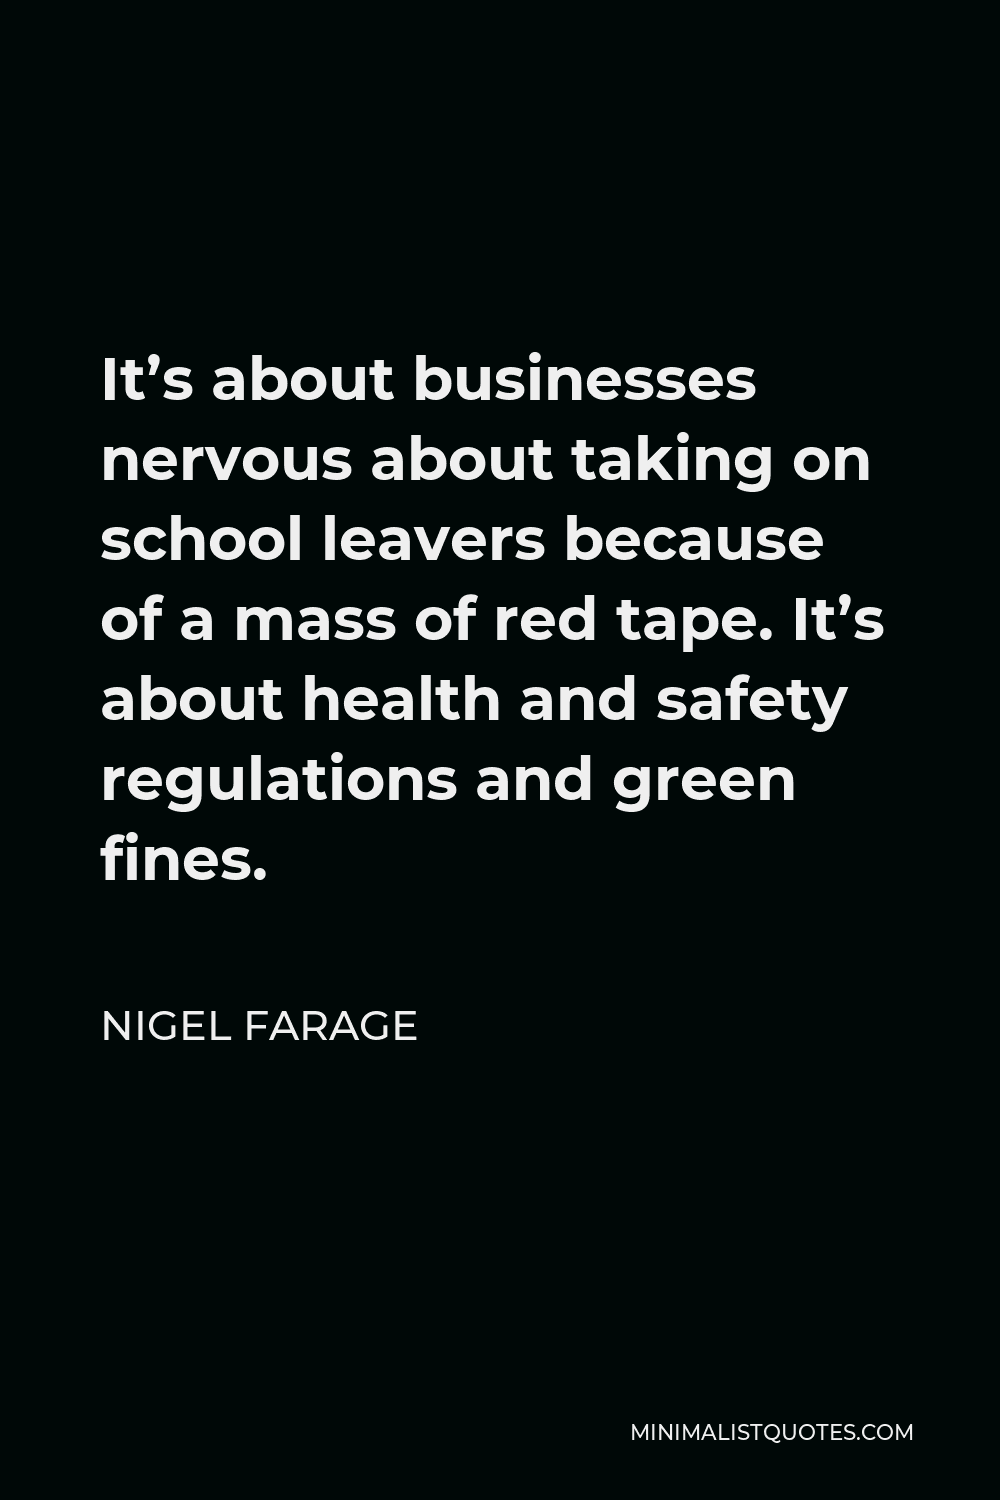 Nigel Farage Quote - It’s about businesses nervous about taking on school leavers because of a mass of red tape. It’s about health and safety regulations and green fines.